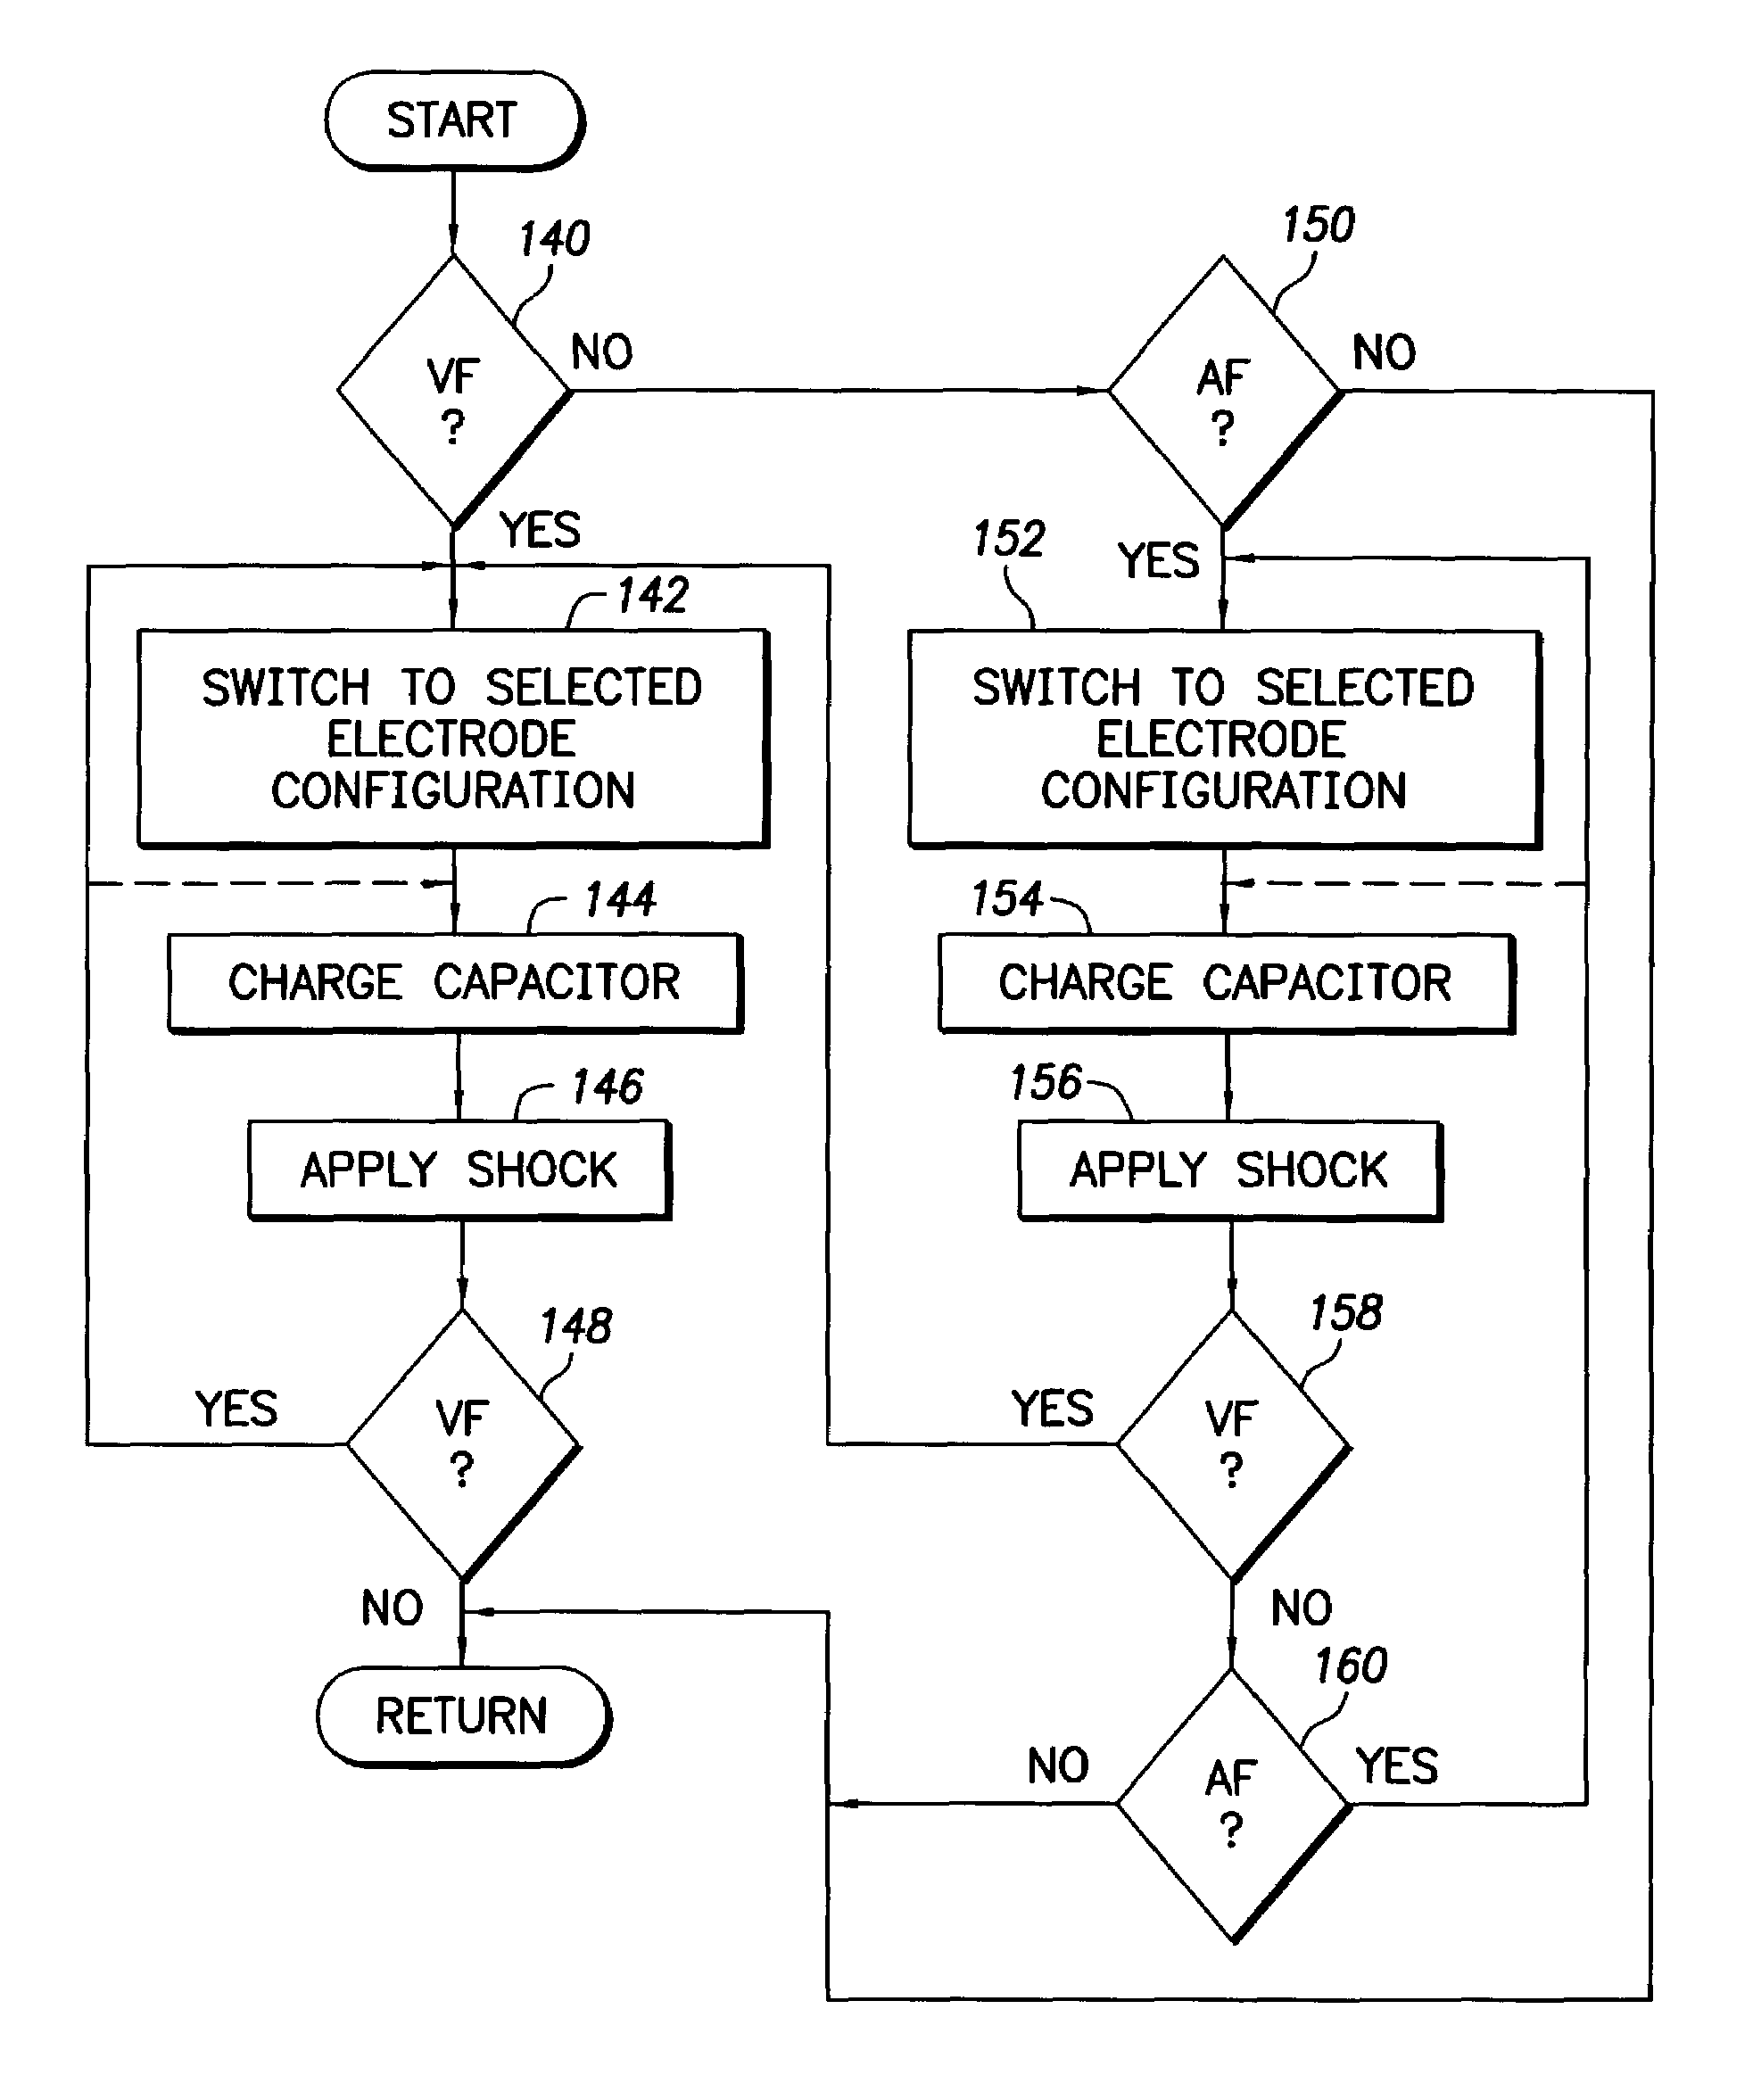 Dual-chamber implantable cardiac stimulation system and device with selectable arrhythmia termination electrode configurations and method